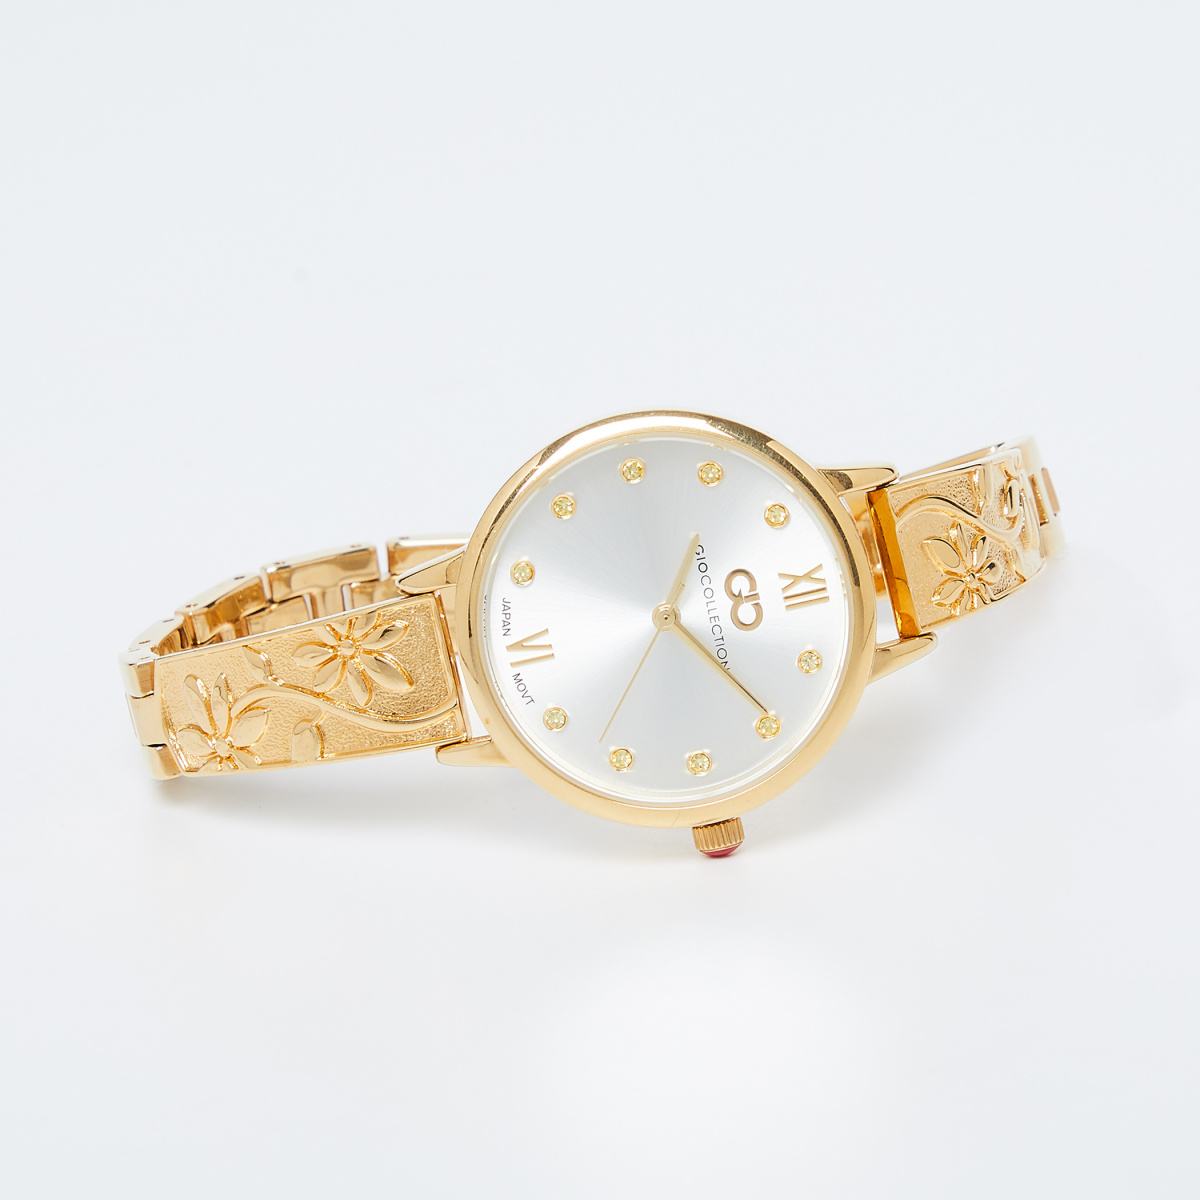 Buy GIO COLLECTION Watches online - 66 products | FASHIOLA INDIA